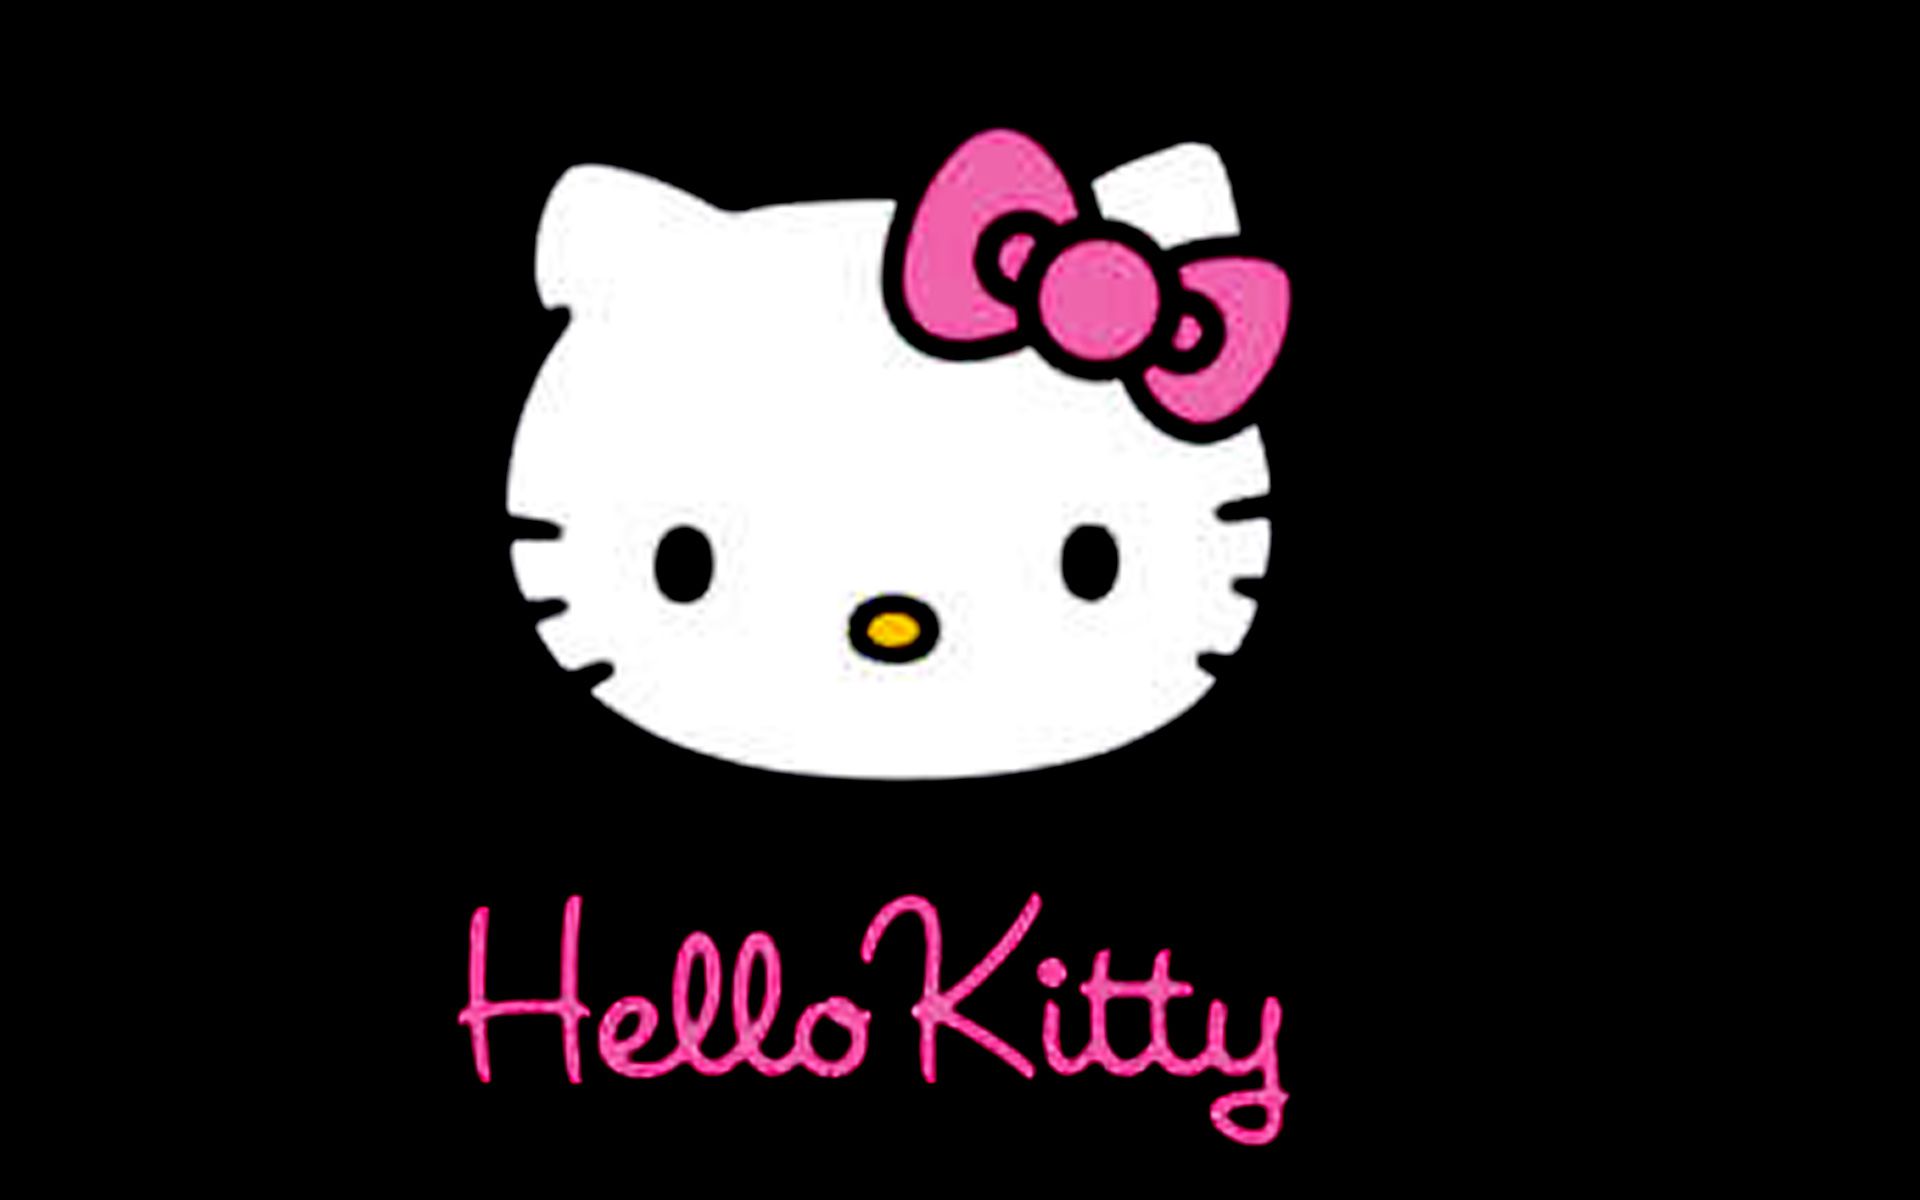 Hello Kitty Pink And Black Love Wallpaper For Android #xekd4 ...